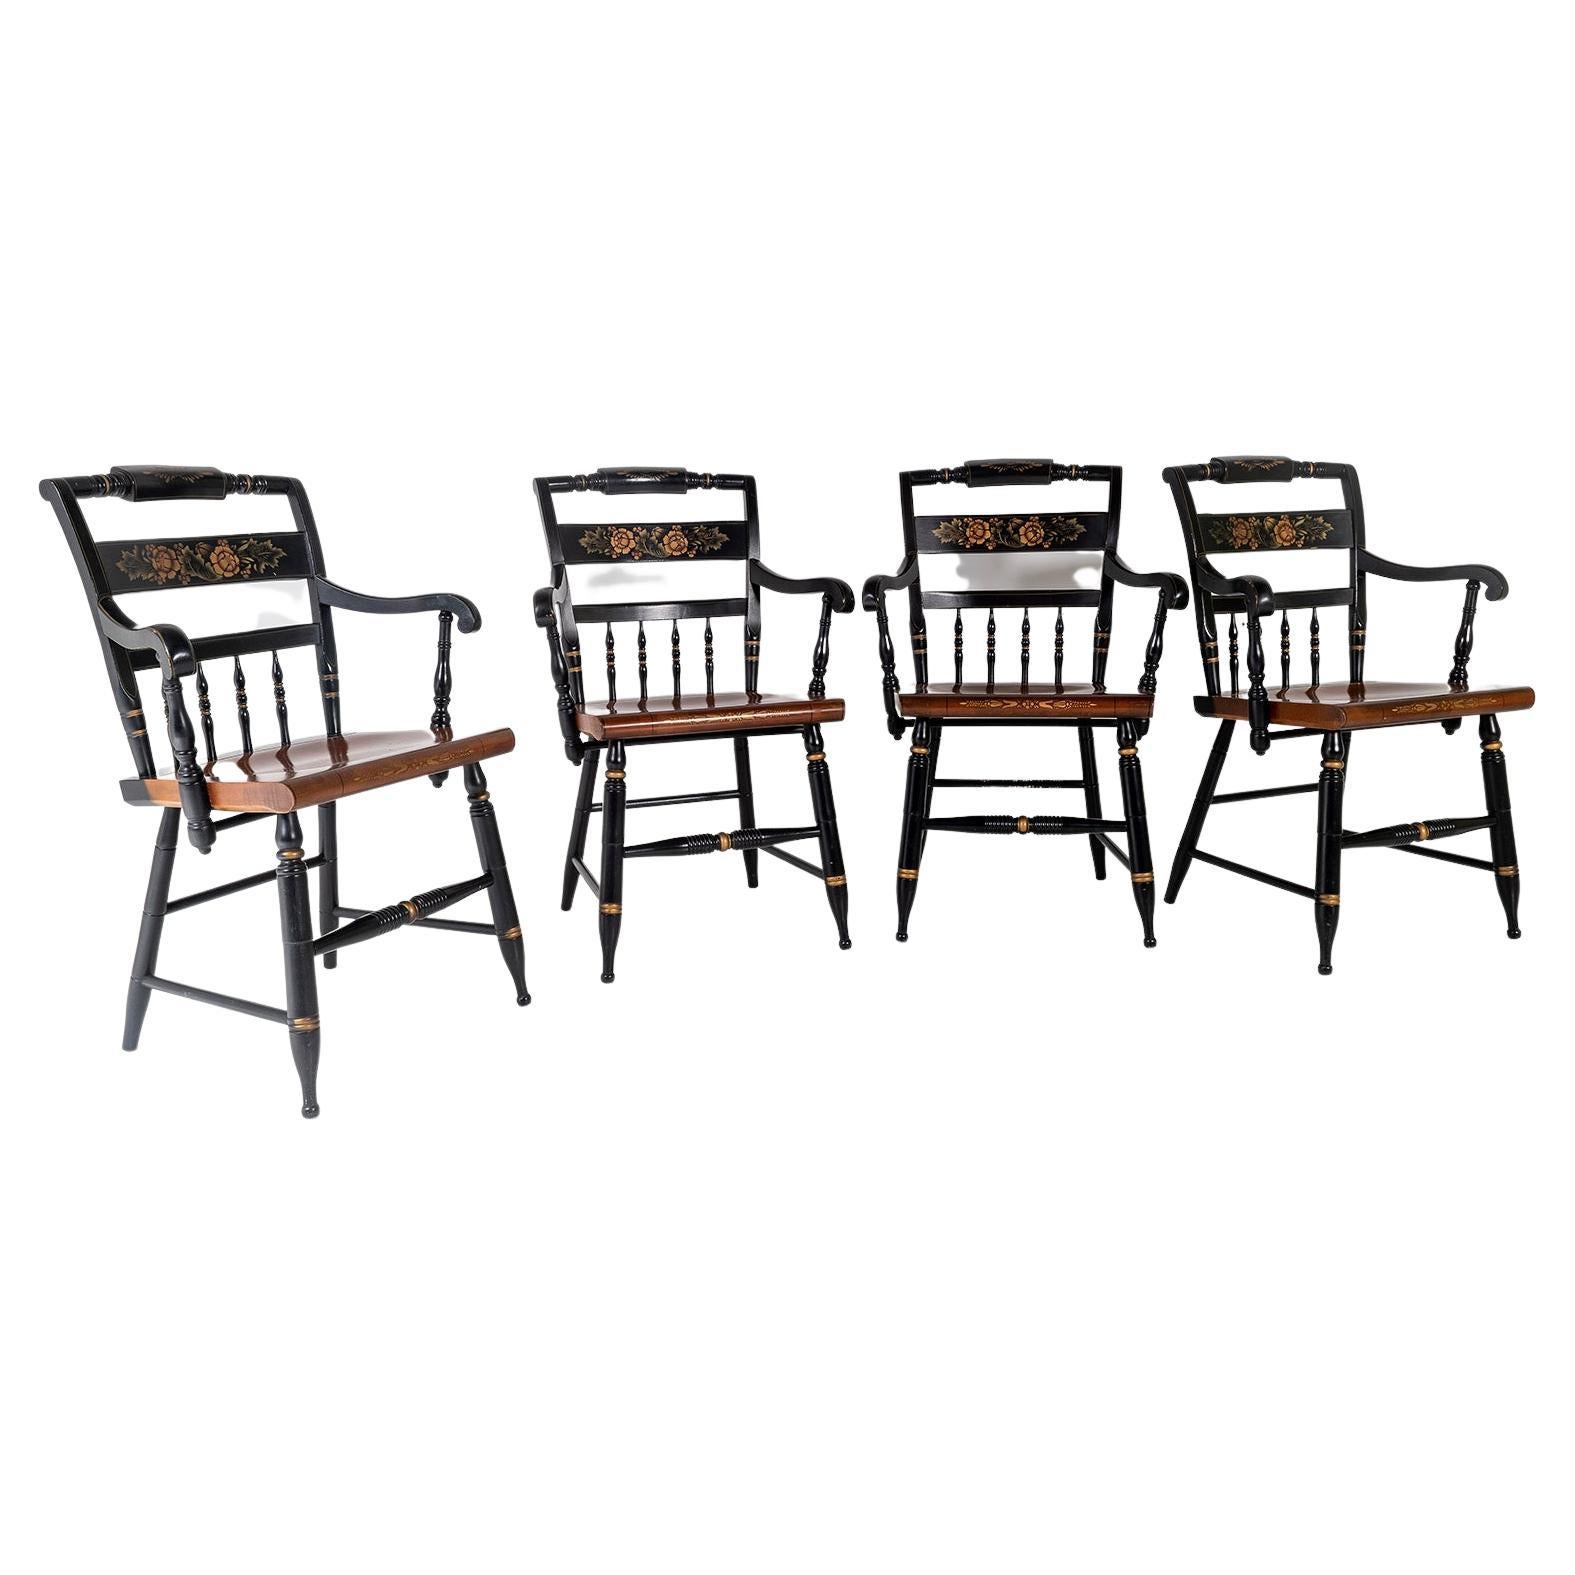 Set of 4, L. Hitchcock Stencilled Painted Black Solid Maple Dining Chairs